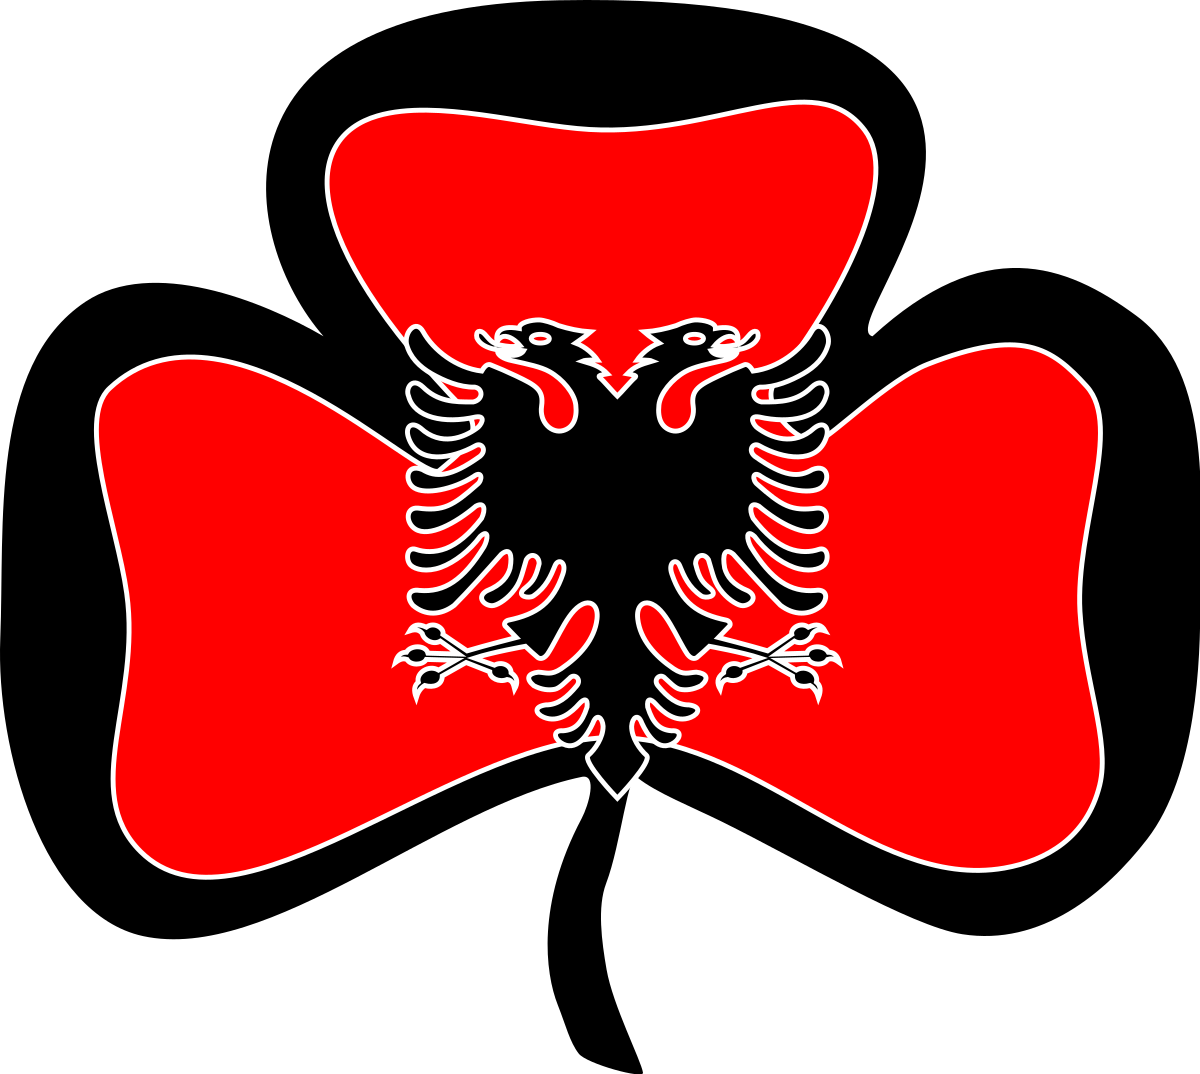 A Red And Black Flag With Two Birds